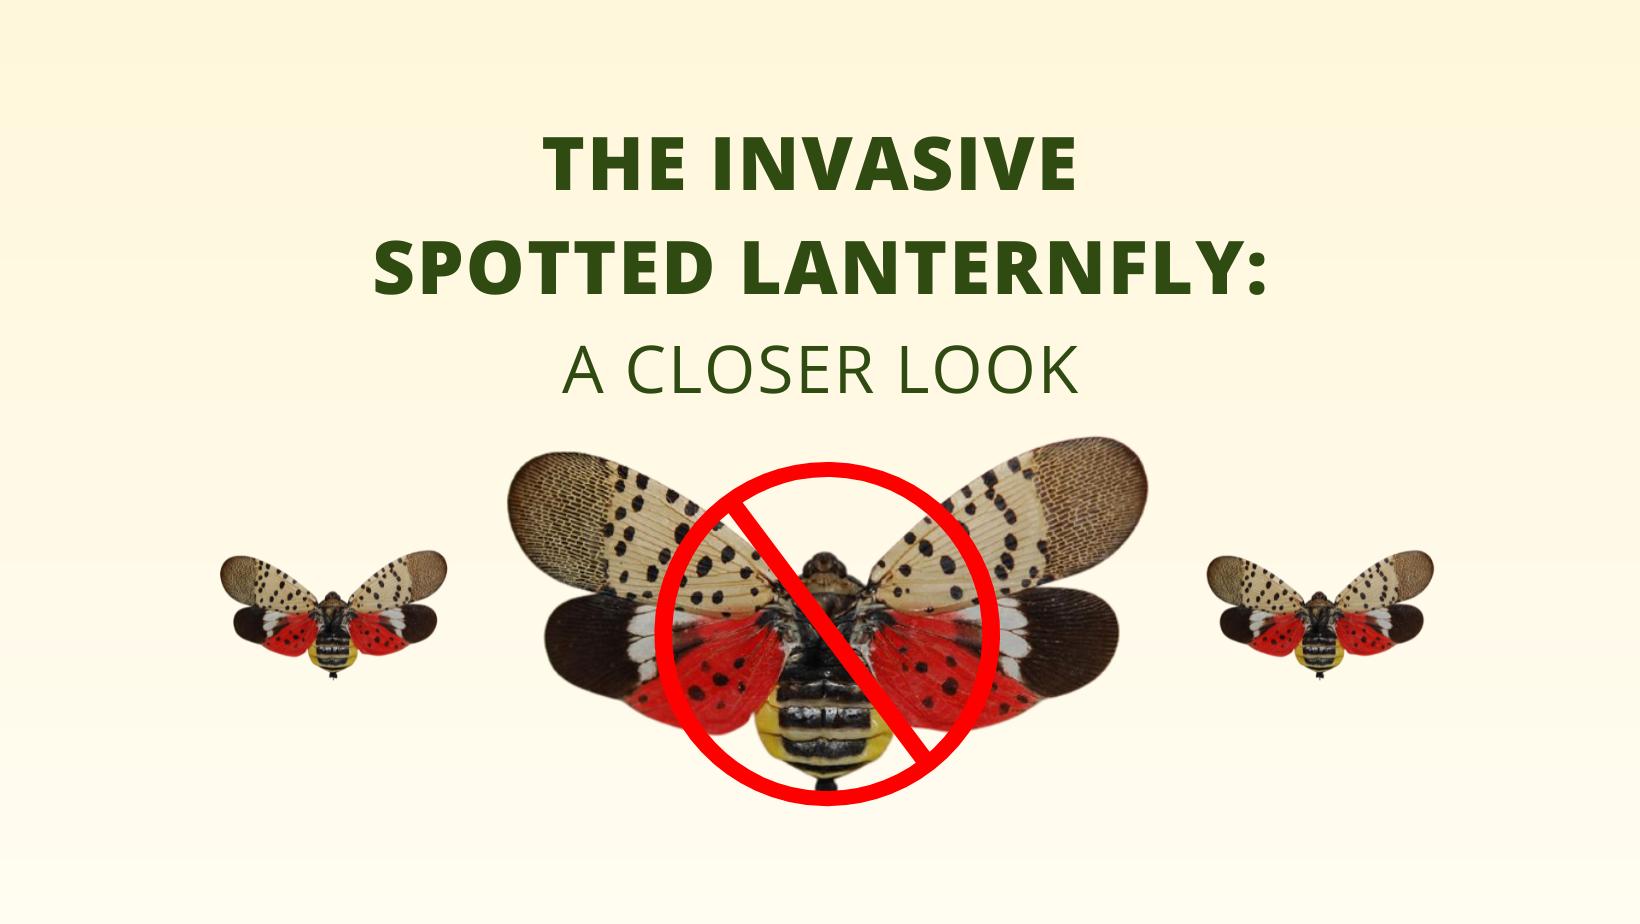 ELANCO Library. The Invasive Spotted Lanternfly: A Closer Look